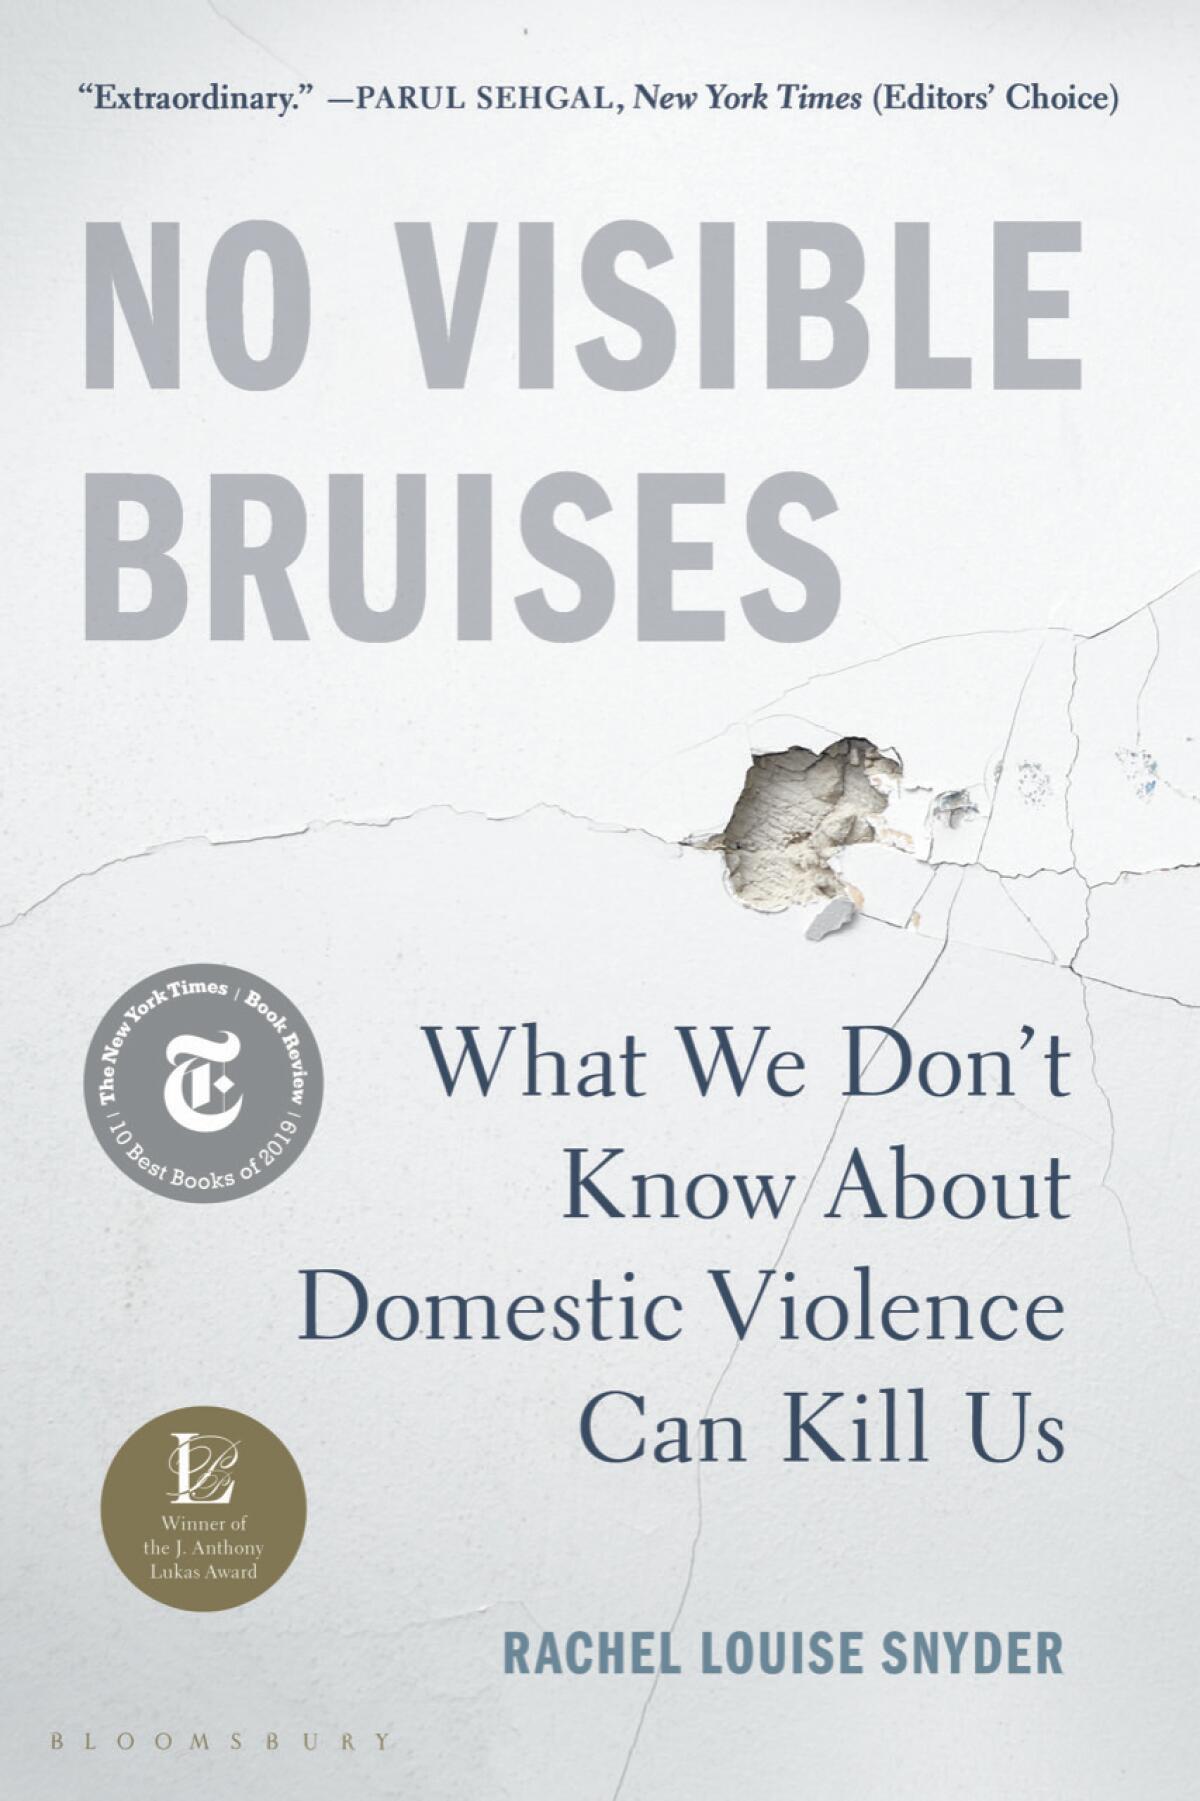 "No Visible Bruises: What We Don't Know About Domestic Violence Can Kill Us"